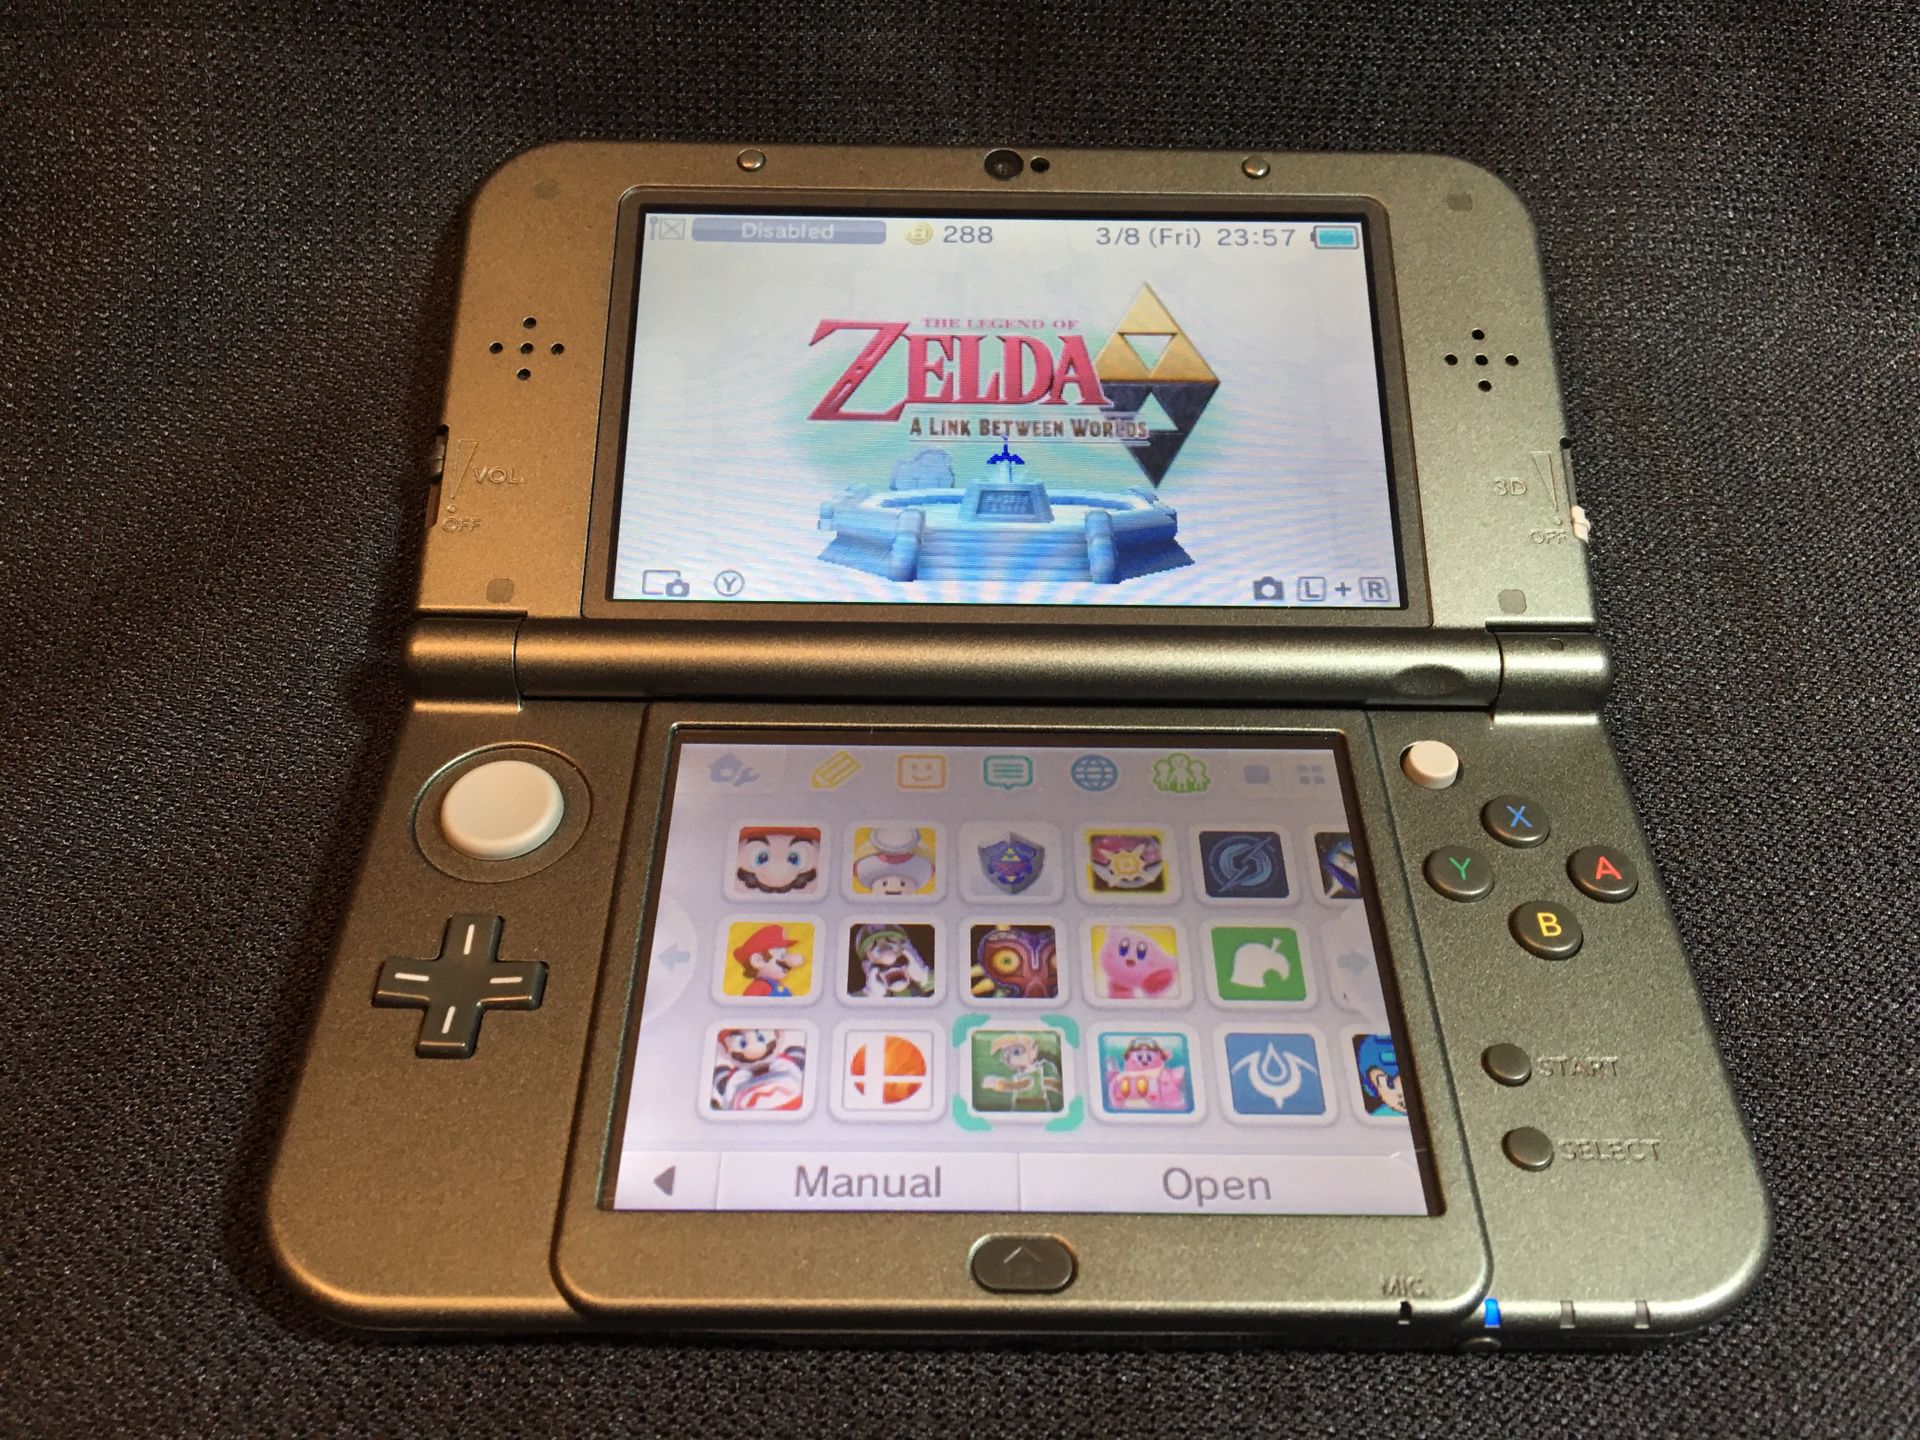 (New) Nintendo 3DS XL, Loaded with 20 of the best 3DS games